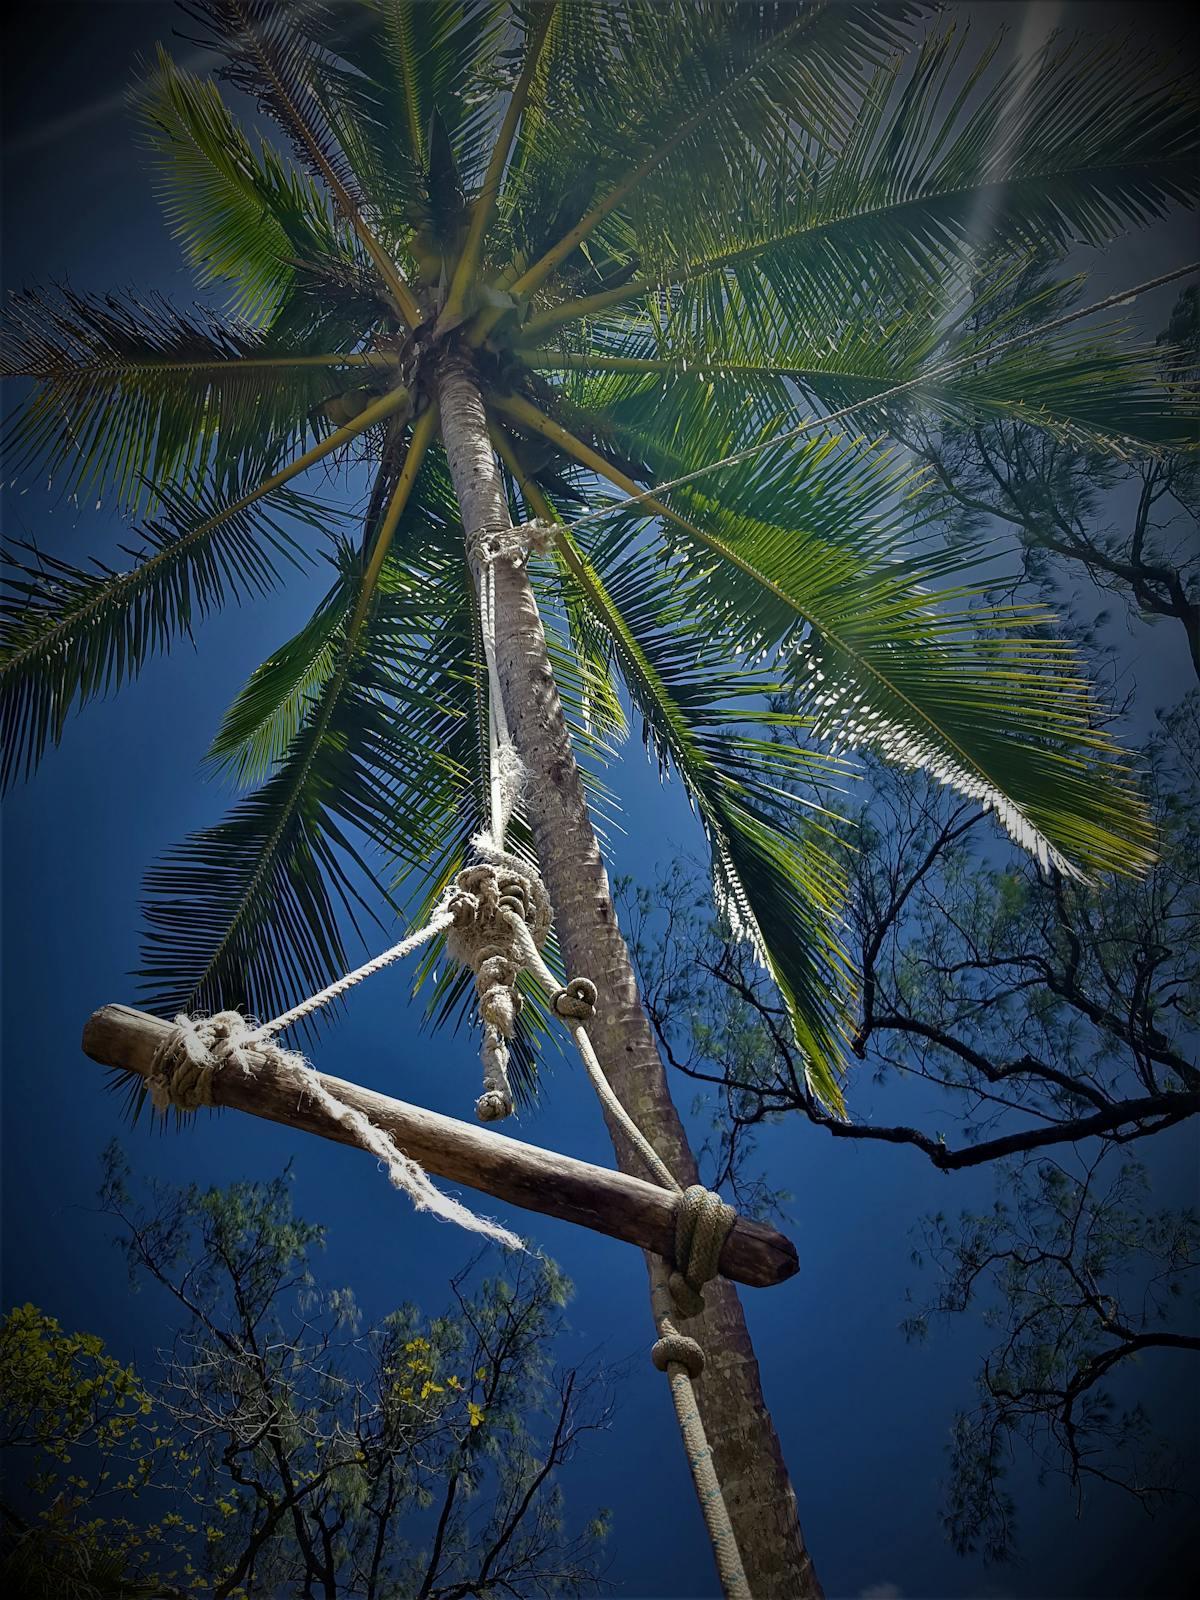 A rope swing located at Cow Bay in the Daintree that is frequently used by visitors to the beach by